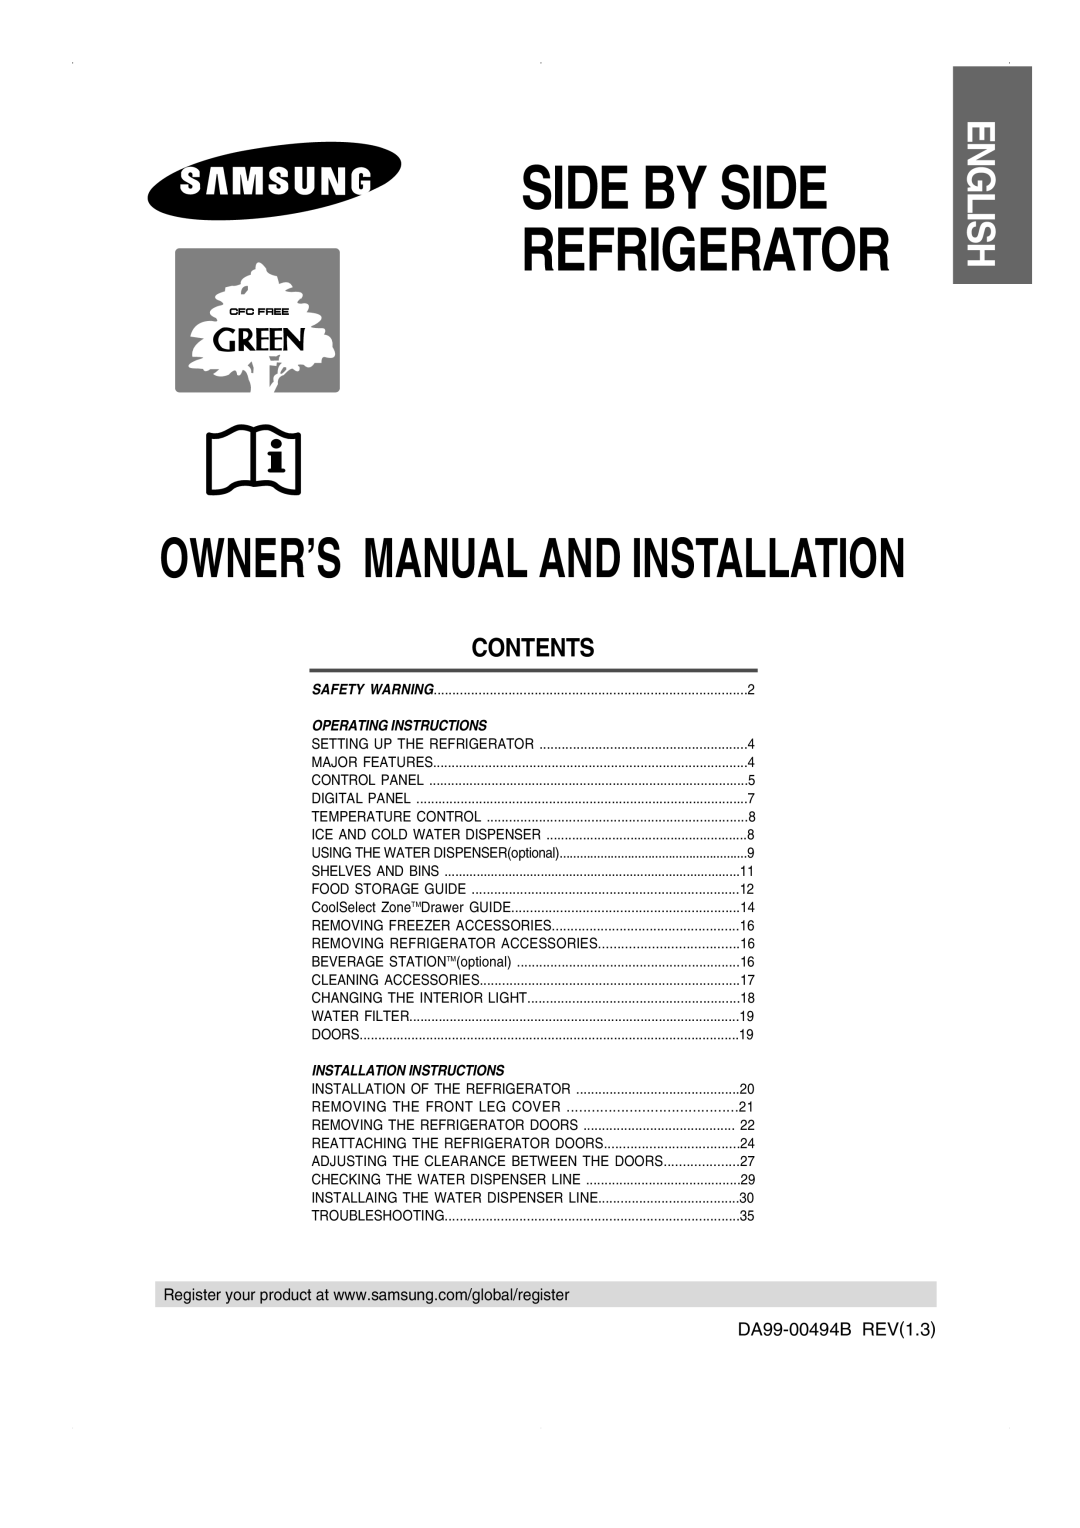 Samsung RS23FESW owner manual English, Contents, Side By Side, Refrigerator, Operating Instructions 